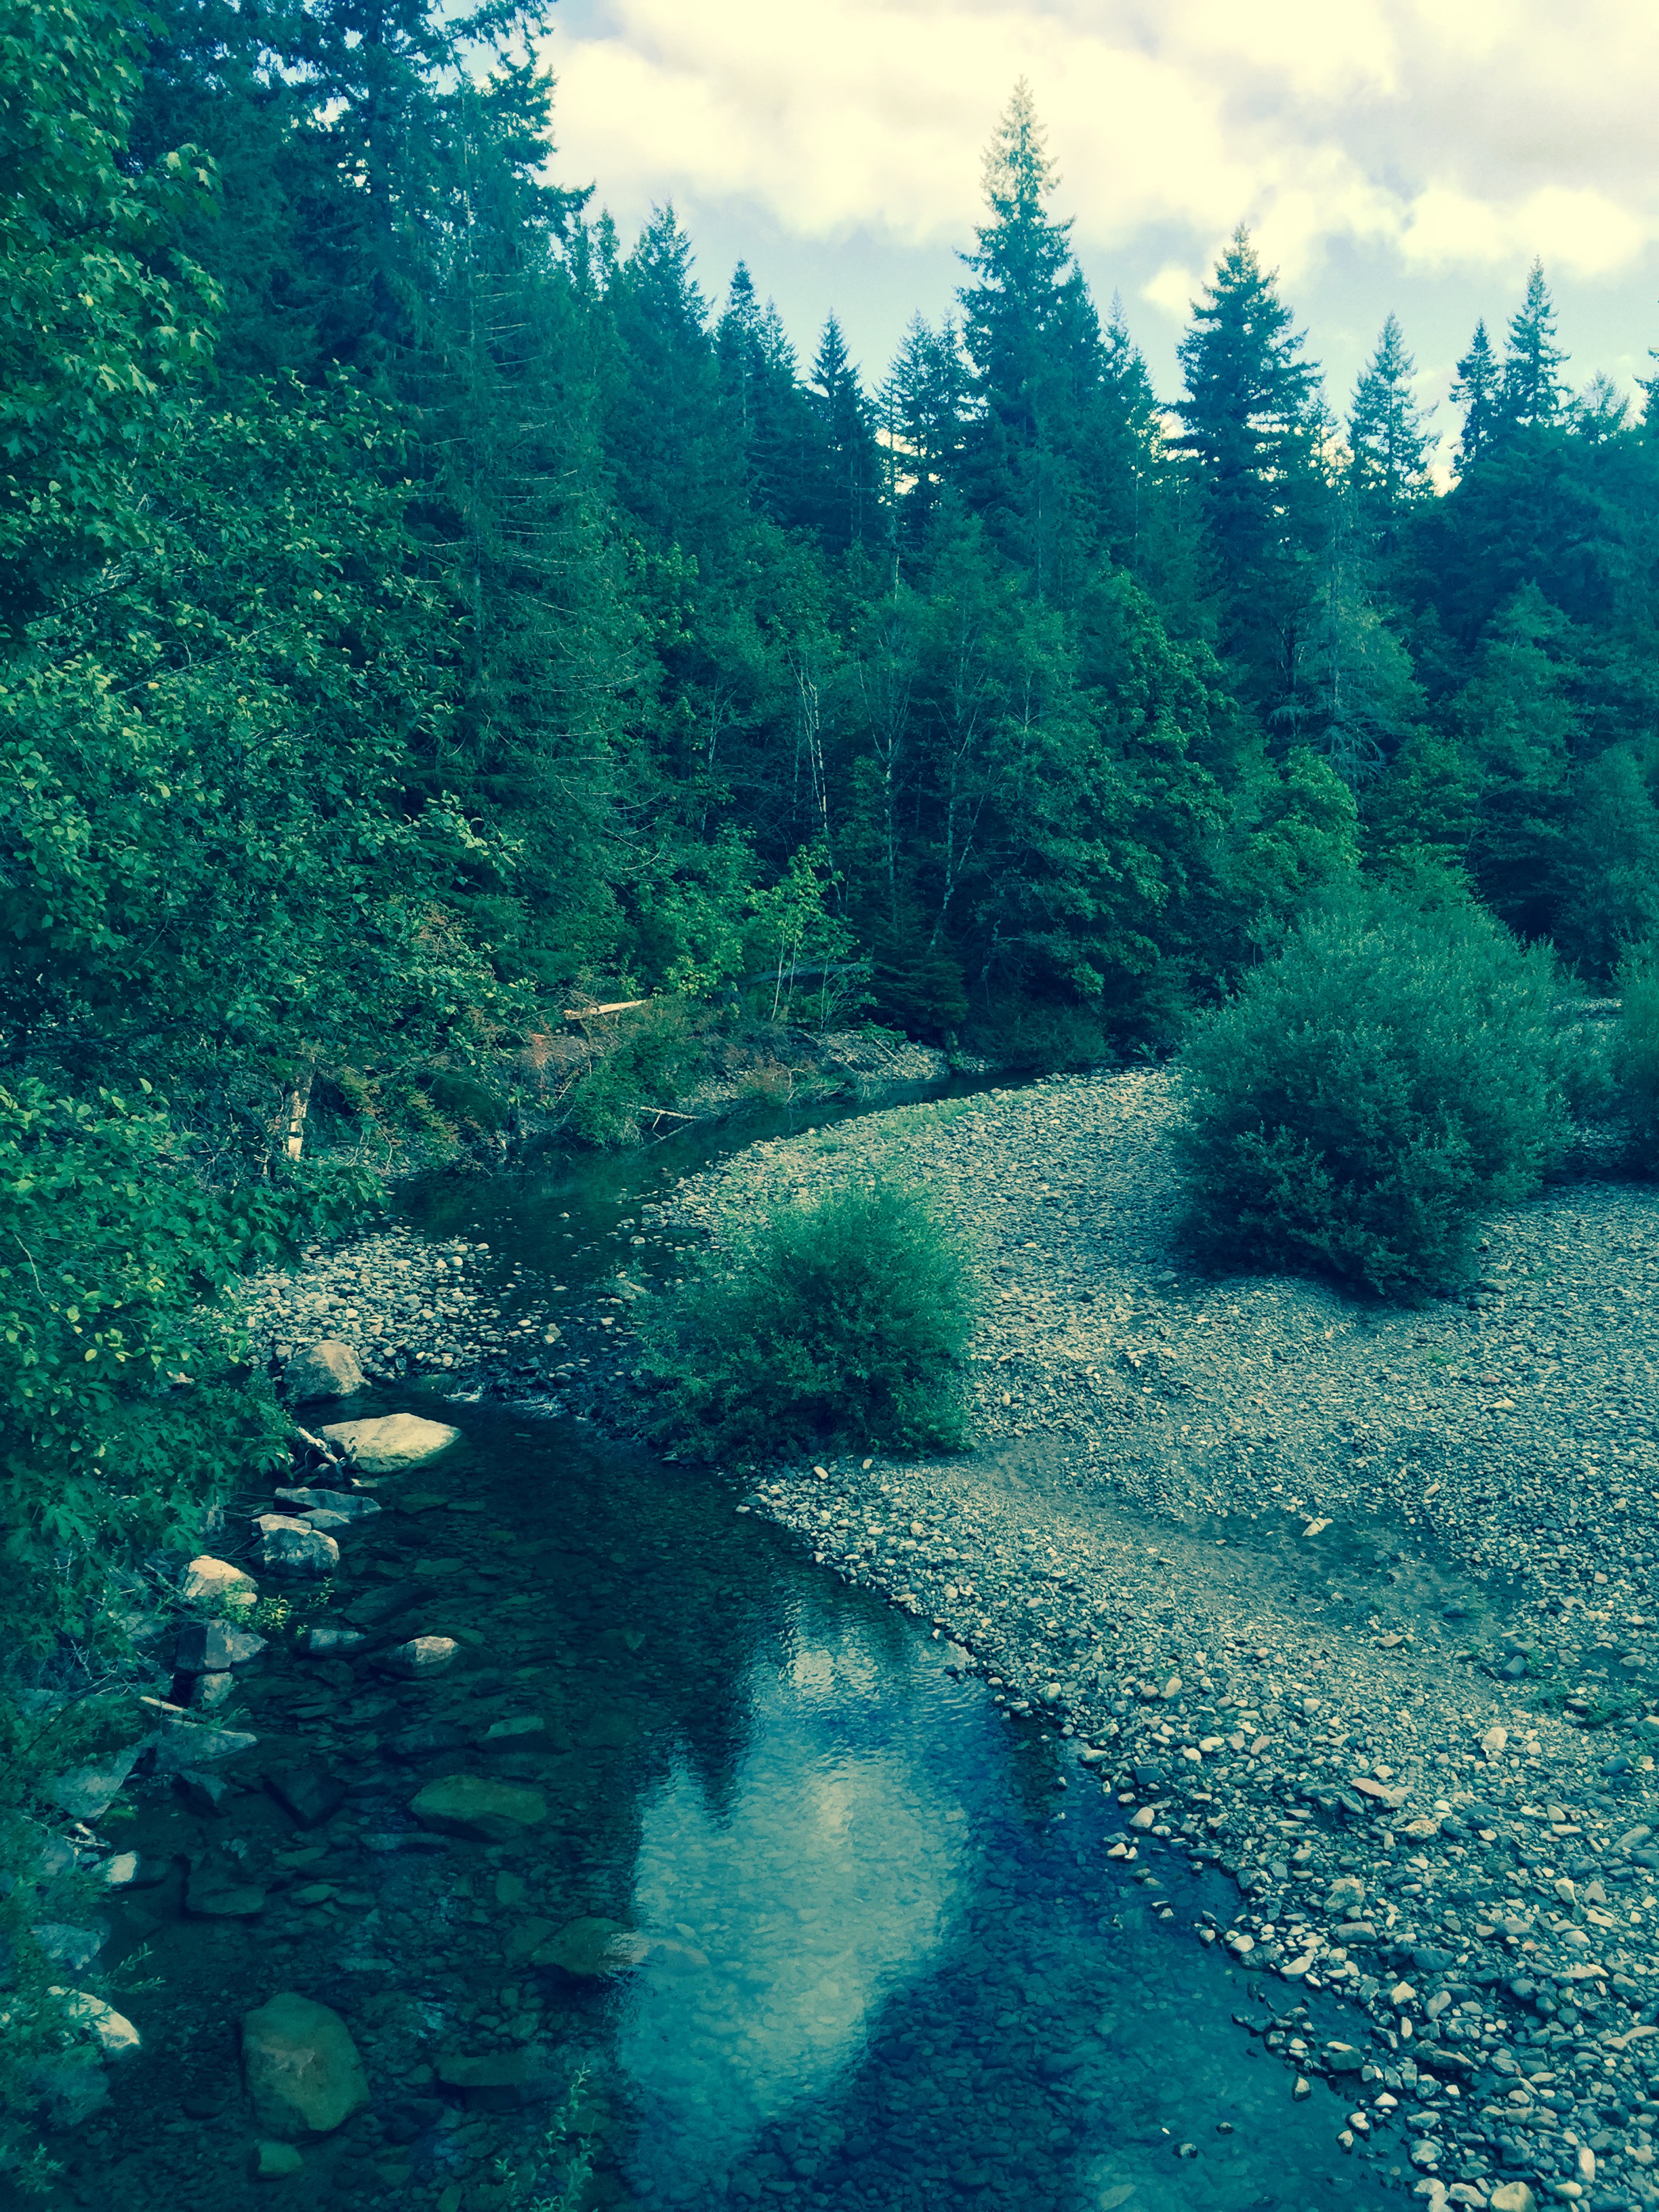 Headwaters of the South Santiam